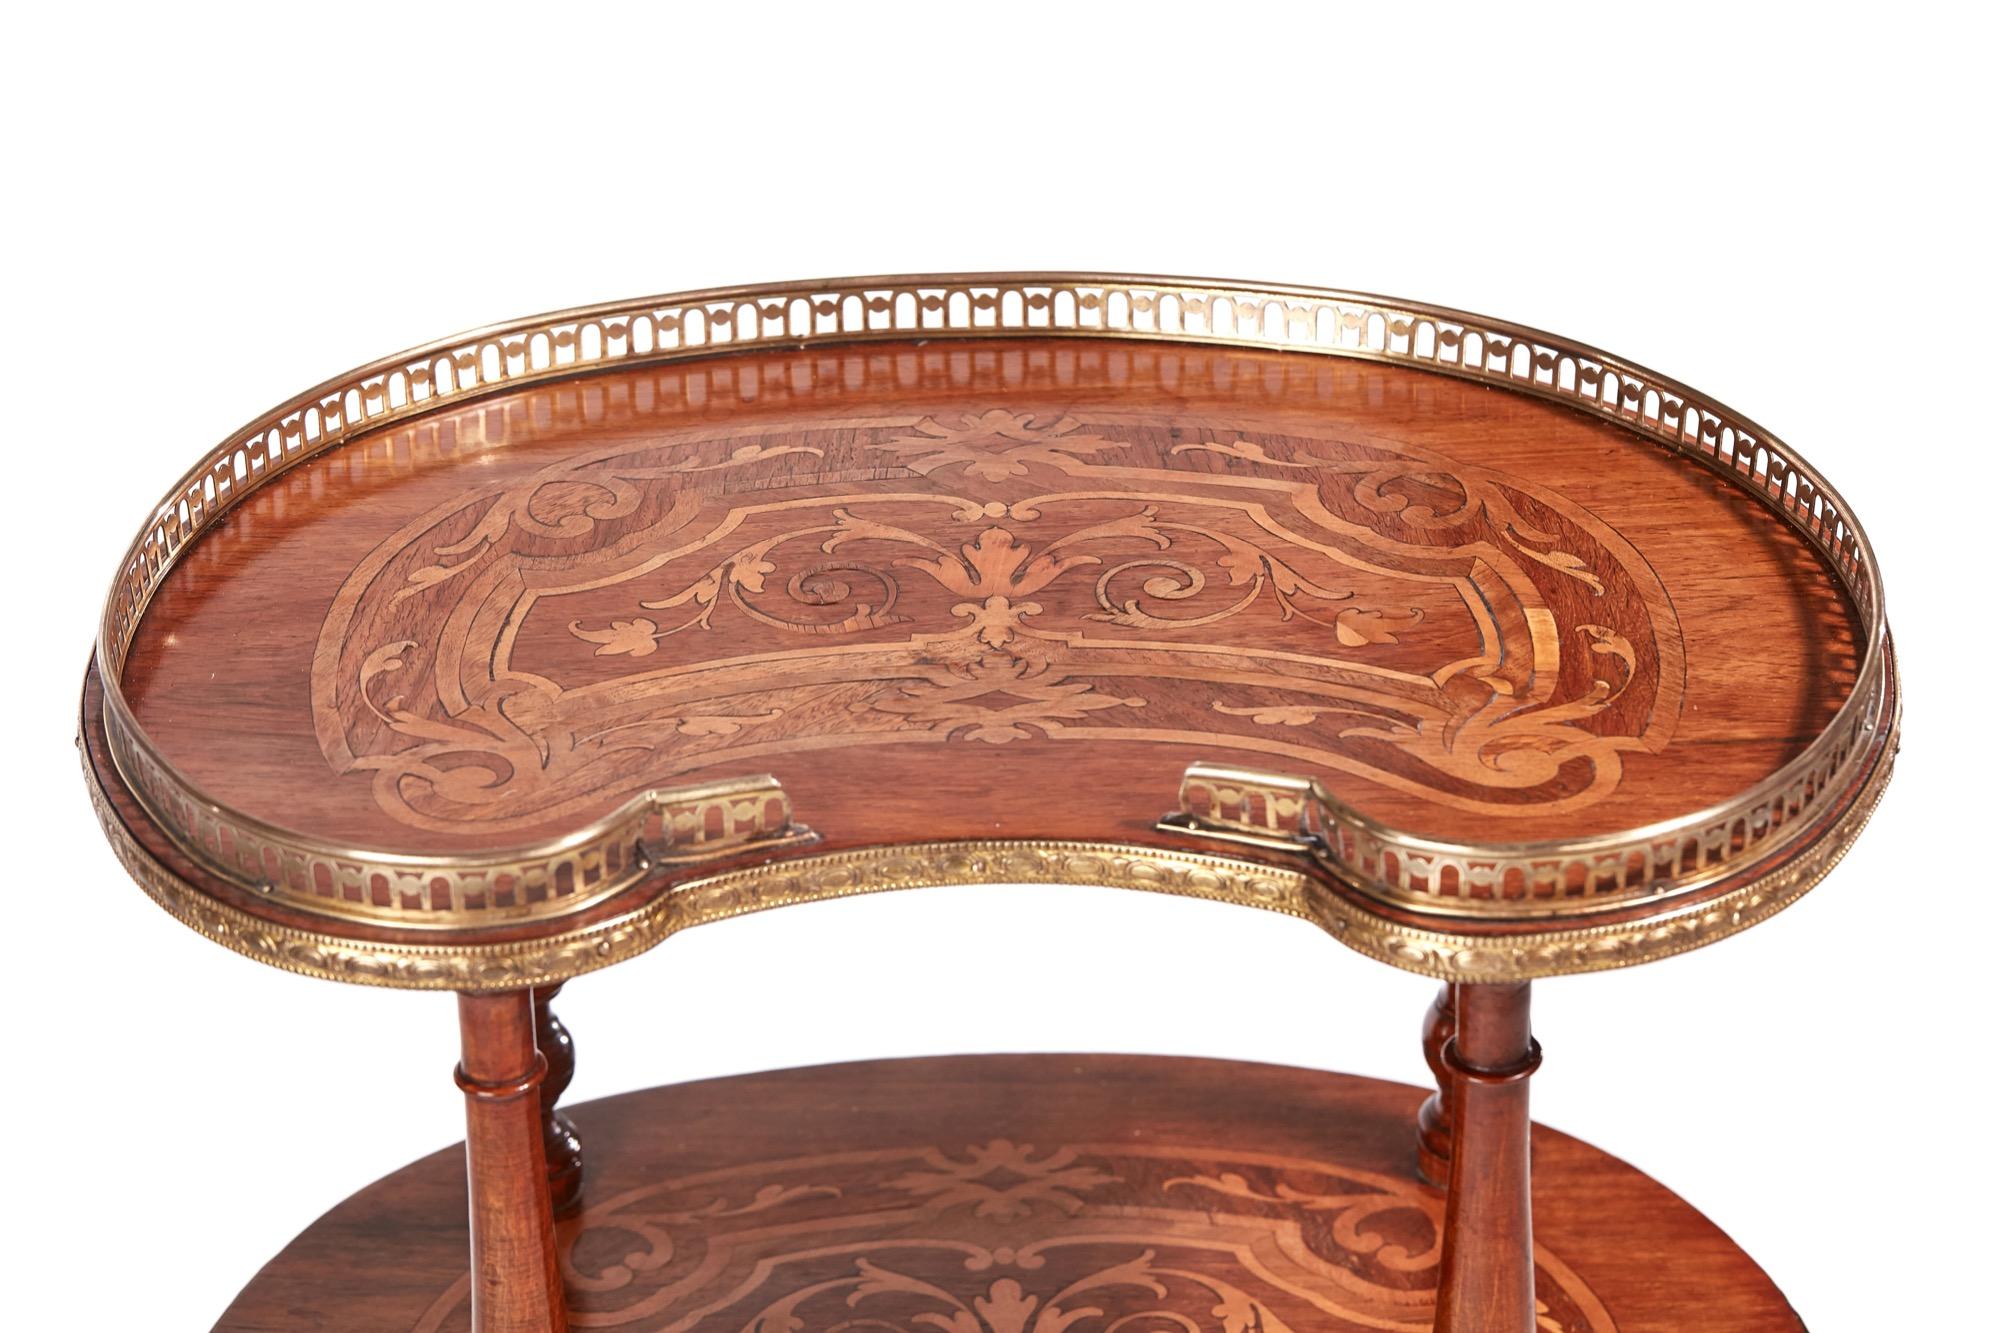 This is a quality 19th century antique French marquetry étagère which has a pierced gilt gallery with a very elegant and beautifully designed marquetry inlaid kidney shaped top, two kidney shaped under-tiers with marquetry inlay, eight turned